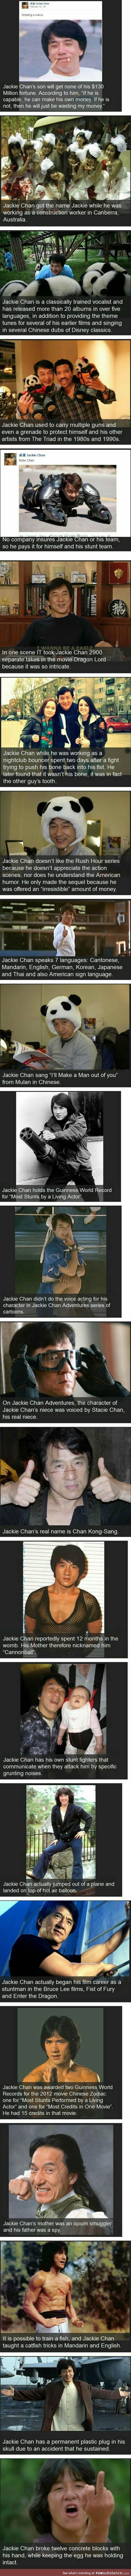 23 facts about Jackie Chan